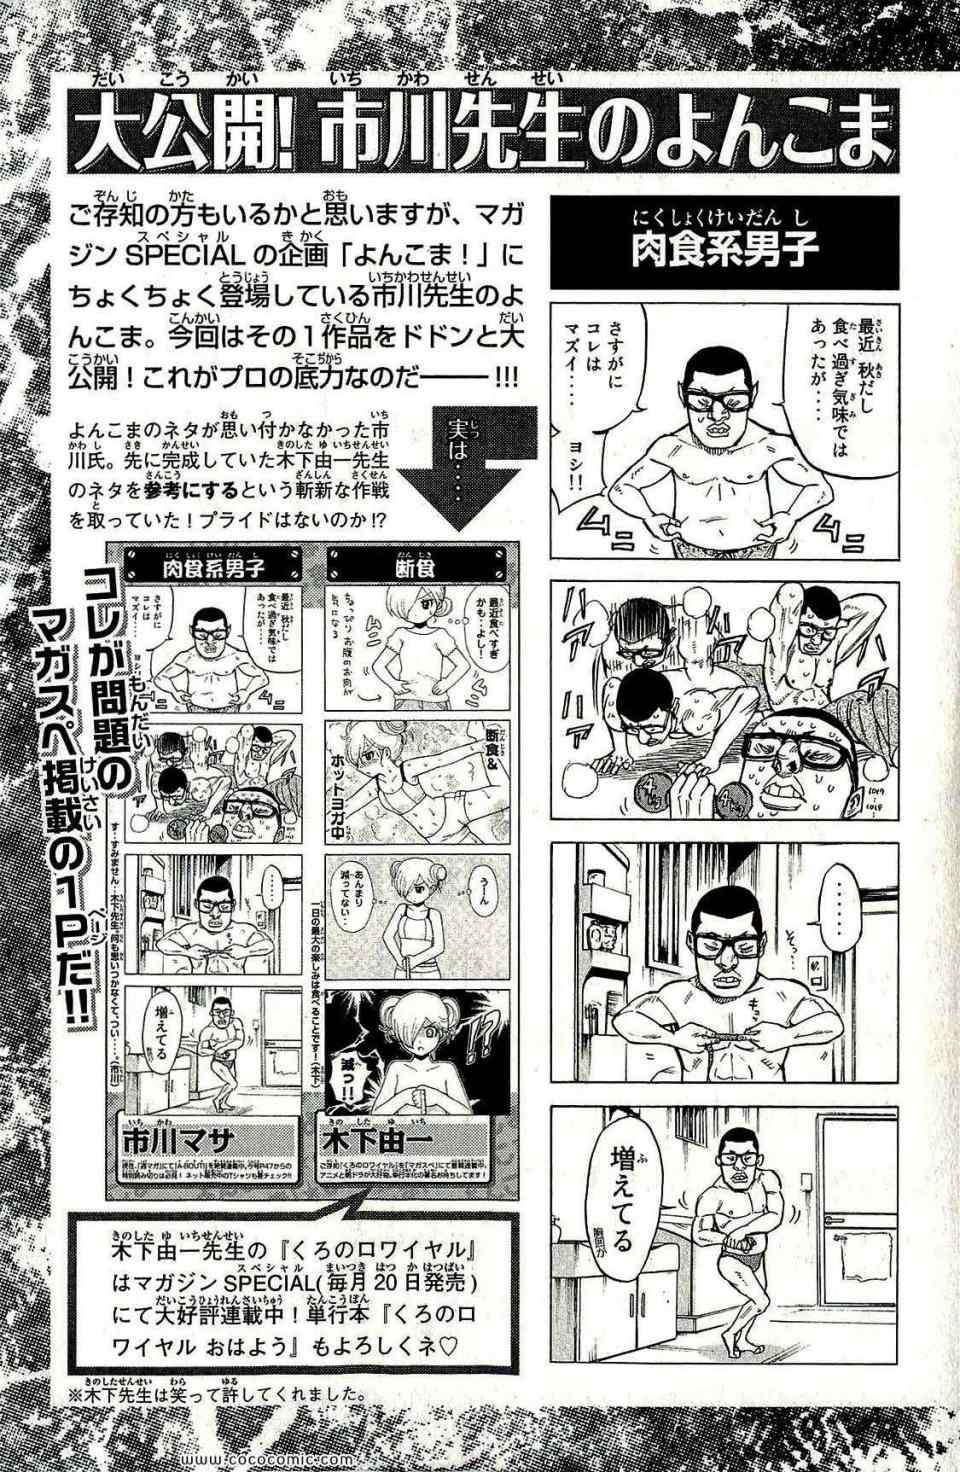 《A-BOUT!(日文)》漫画 A-BOUT! 11卷